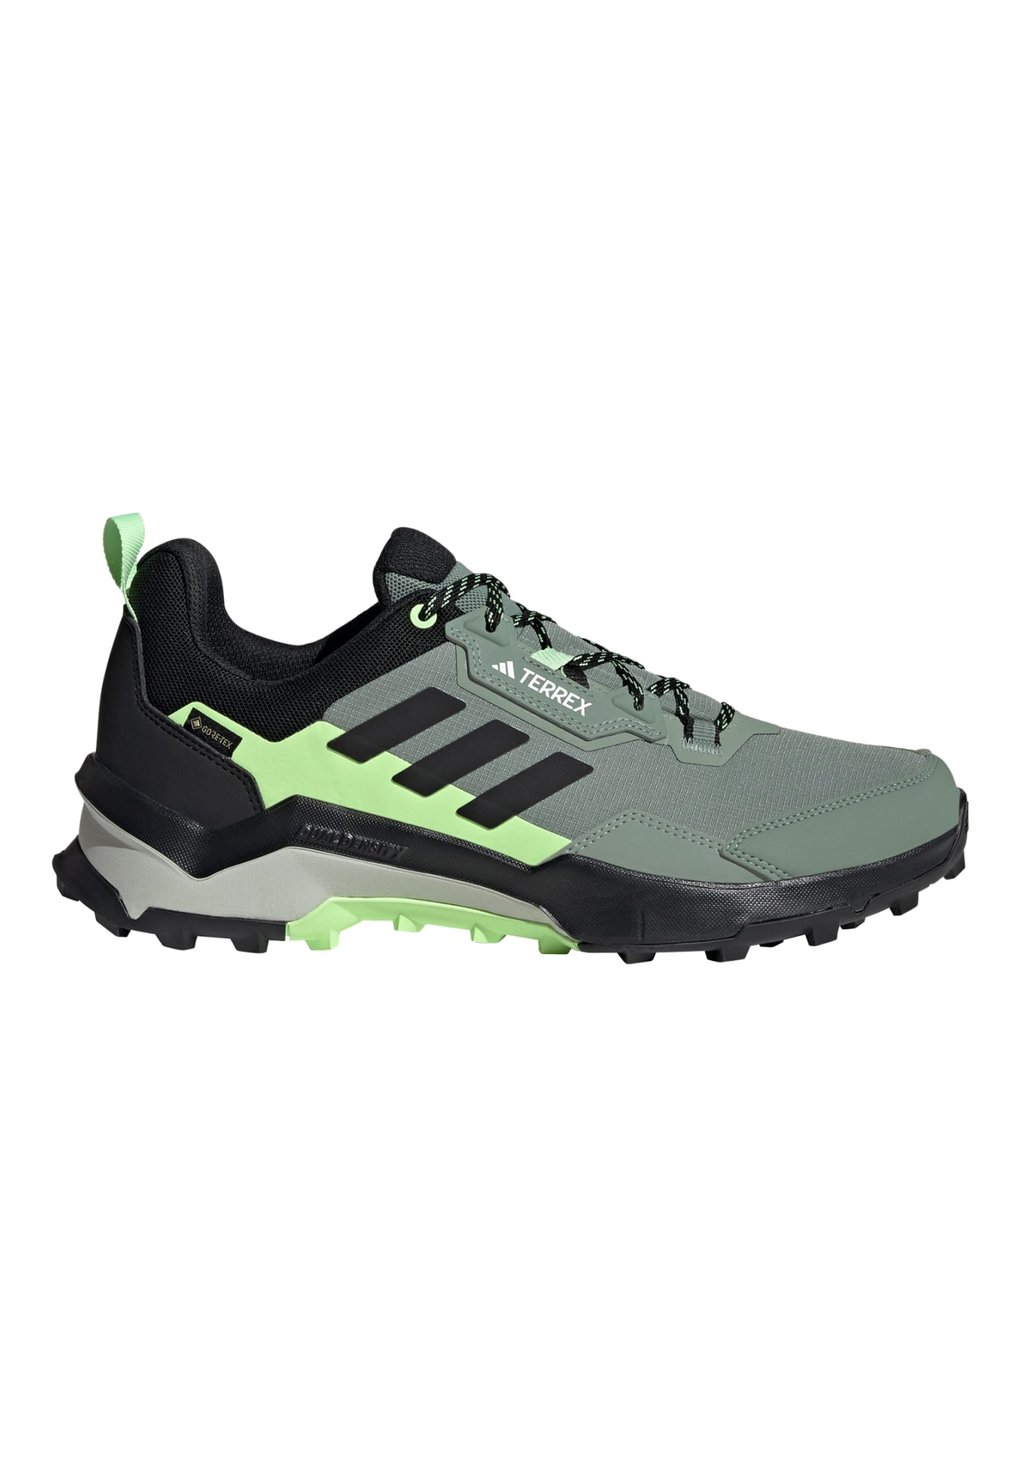 Кроссовки TERREXT AX4 GORE-TEX Adidas Terrex, цвет silver green/core black/crystal jade kjjeaxcmy boutique jewelry s925 pure silver white yellow green chalcedony pomegranate red jade silver antique simple